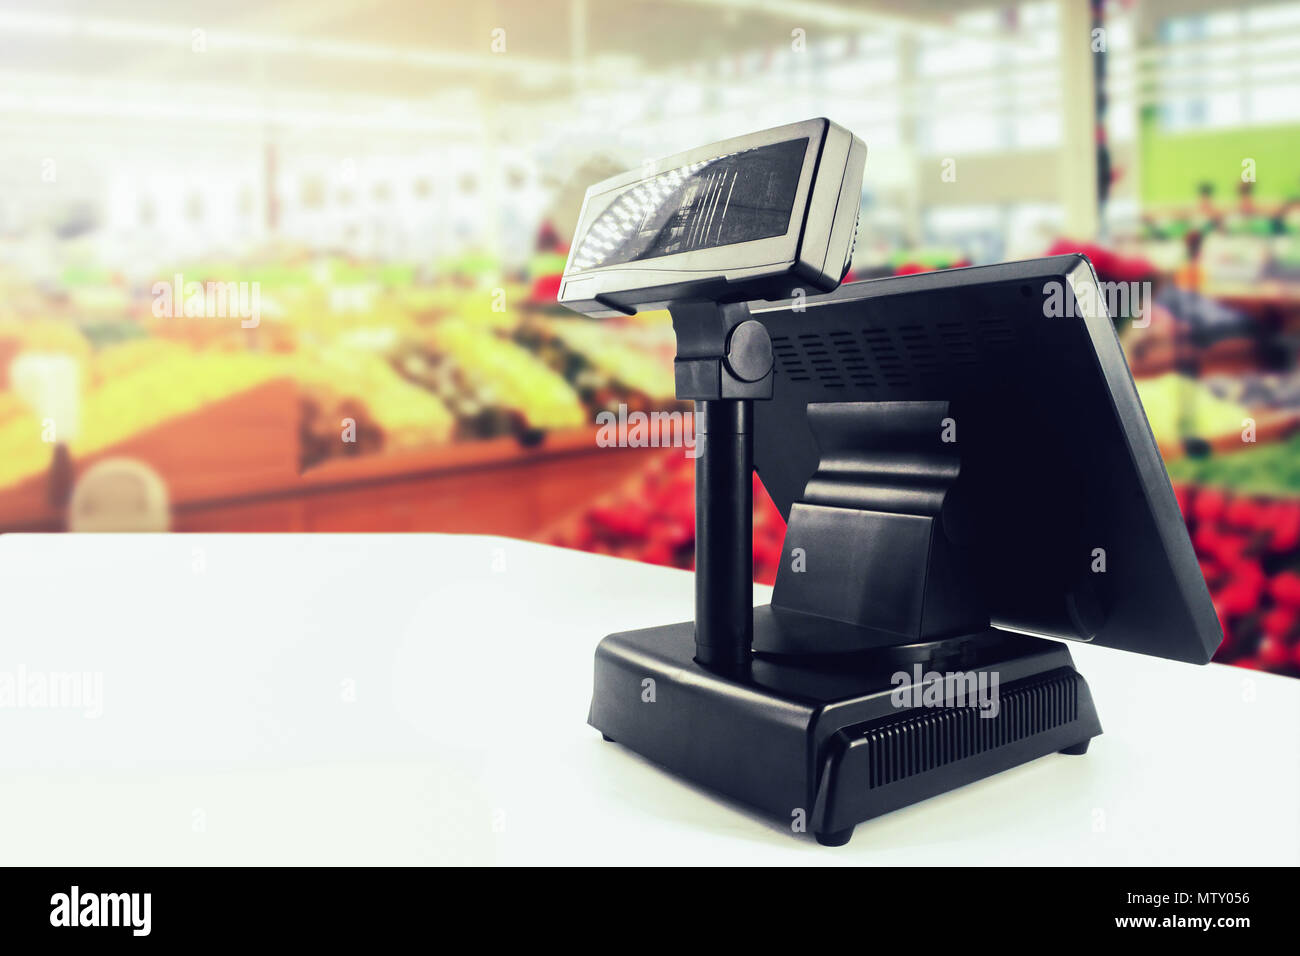 cash register on desk at grocery store Stock Photo